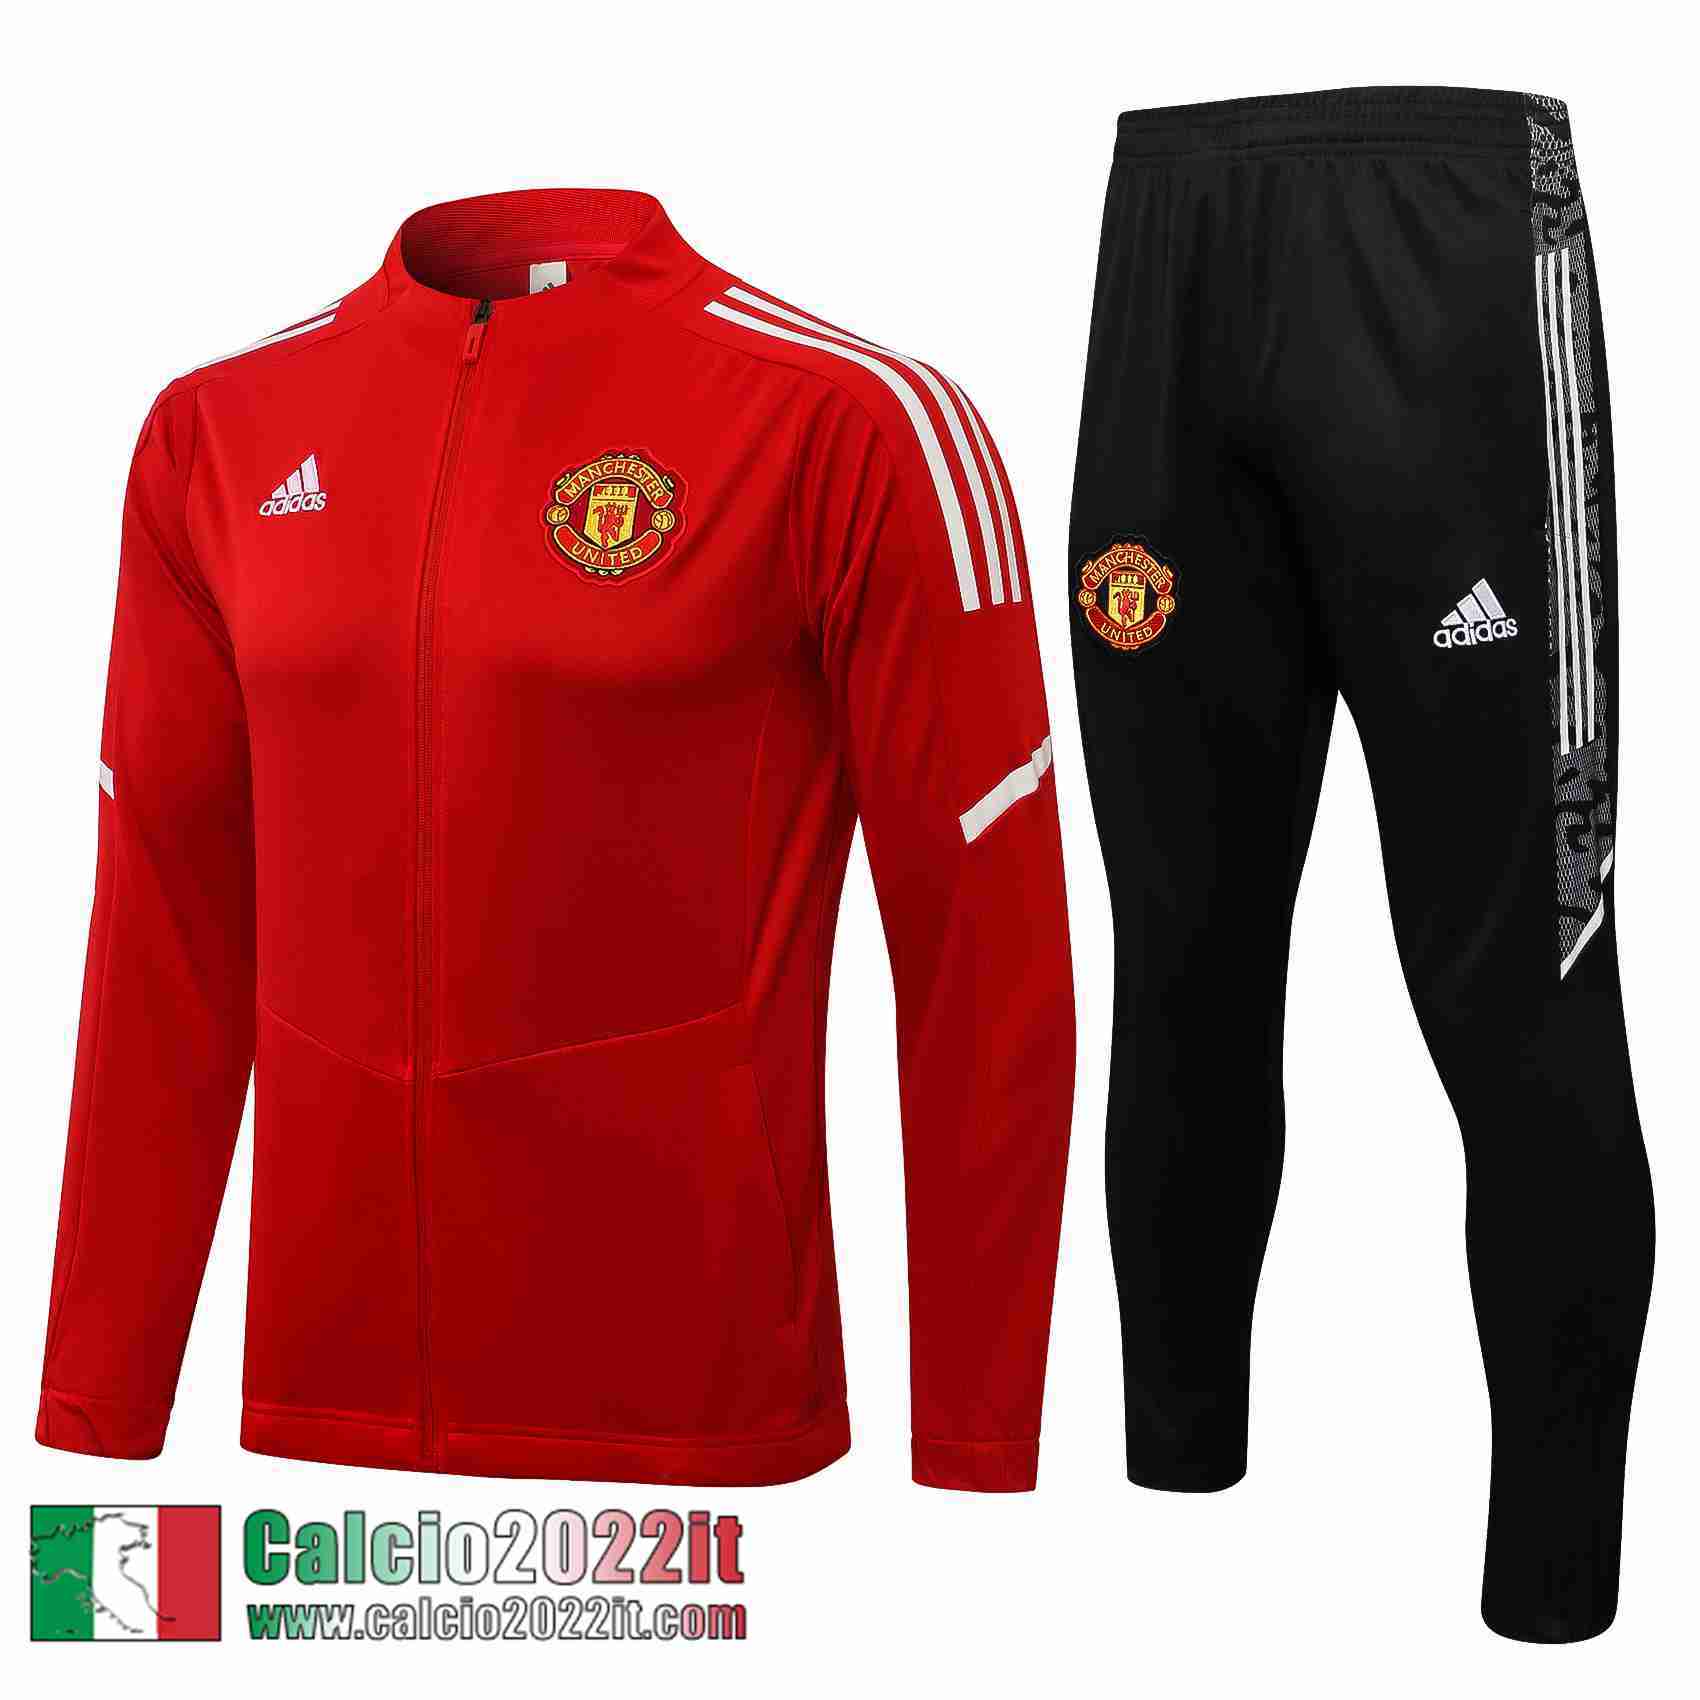 Manchester United Full-Zip Giacca rosso Uomo 2021 2022 JK241